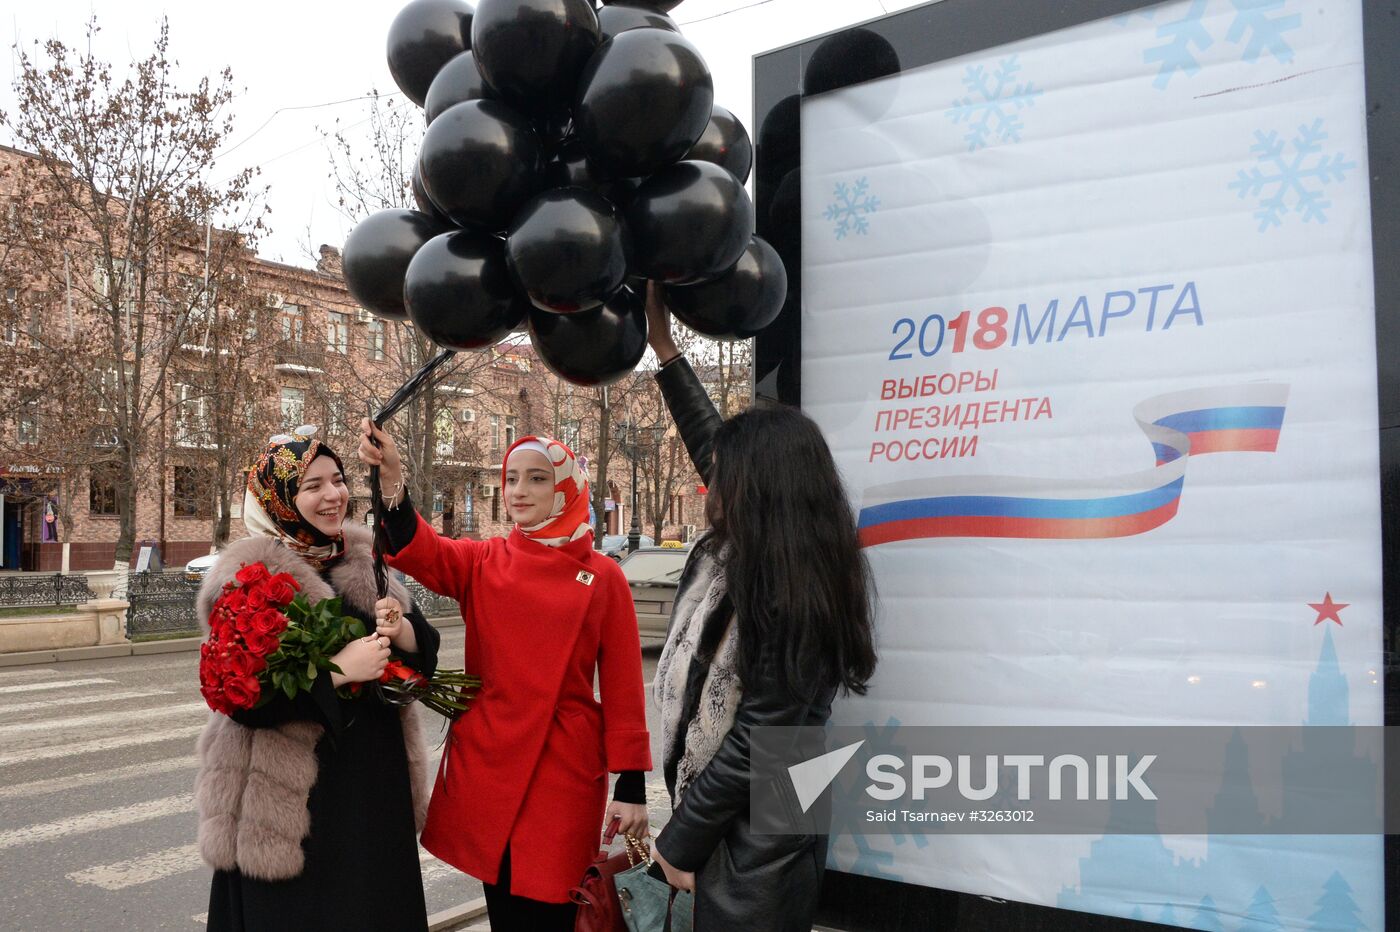 Billboards for Russian presidential election